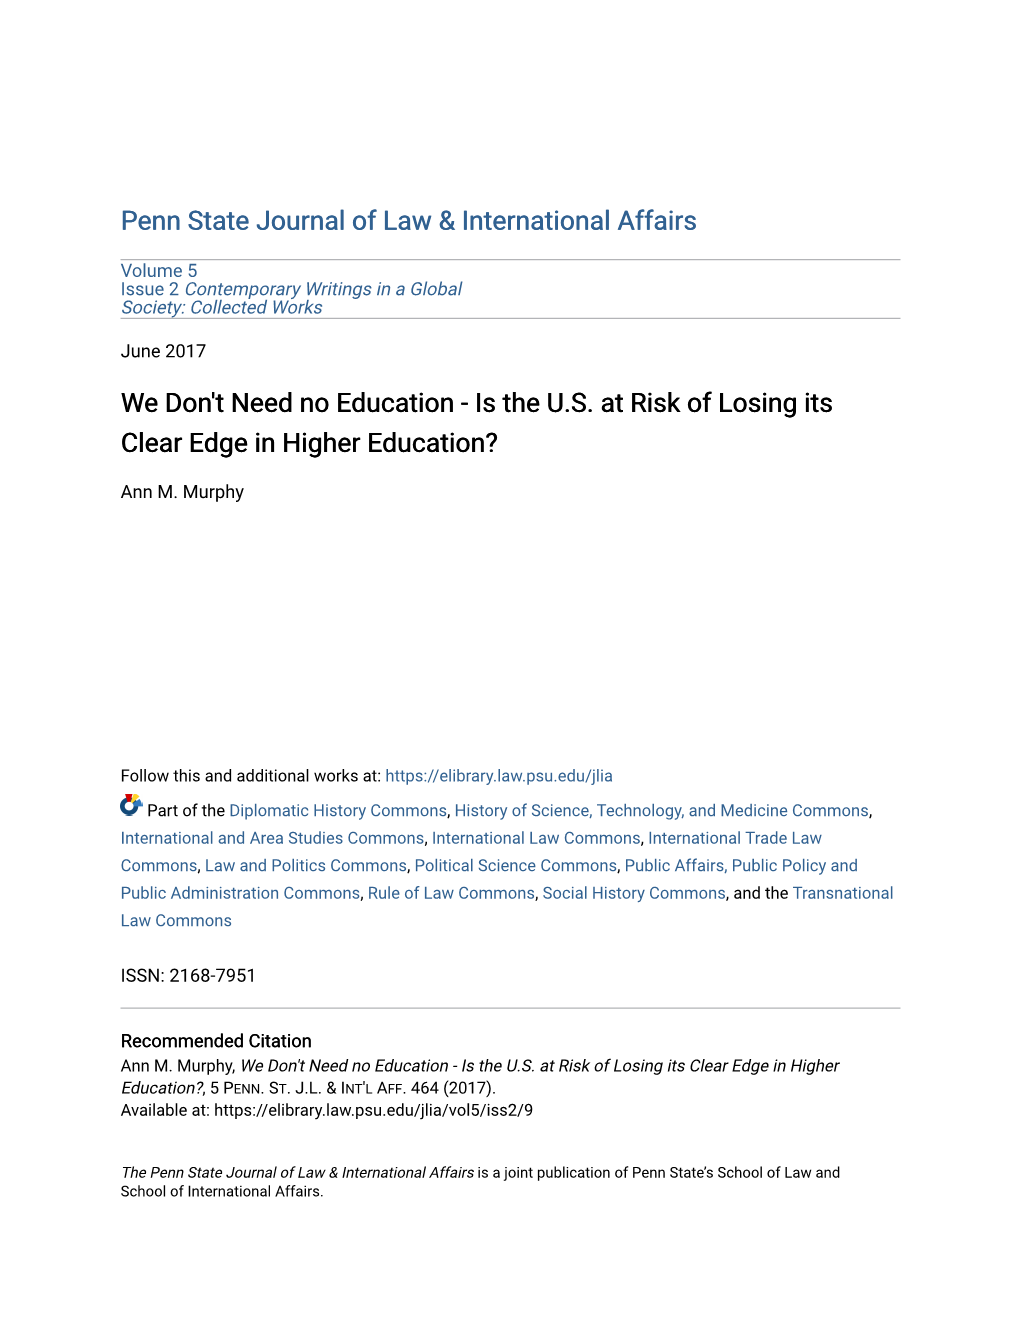 Is the US at Risk of Losing Its Clear Edge in Higher Education?